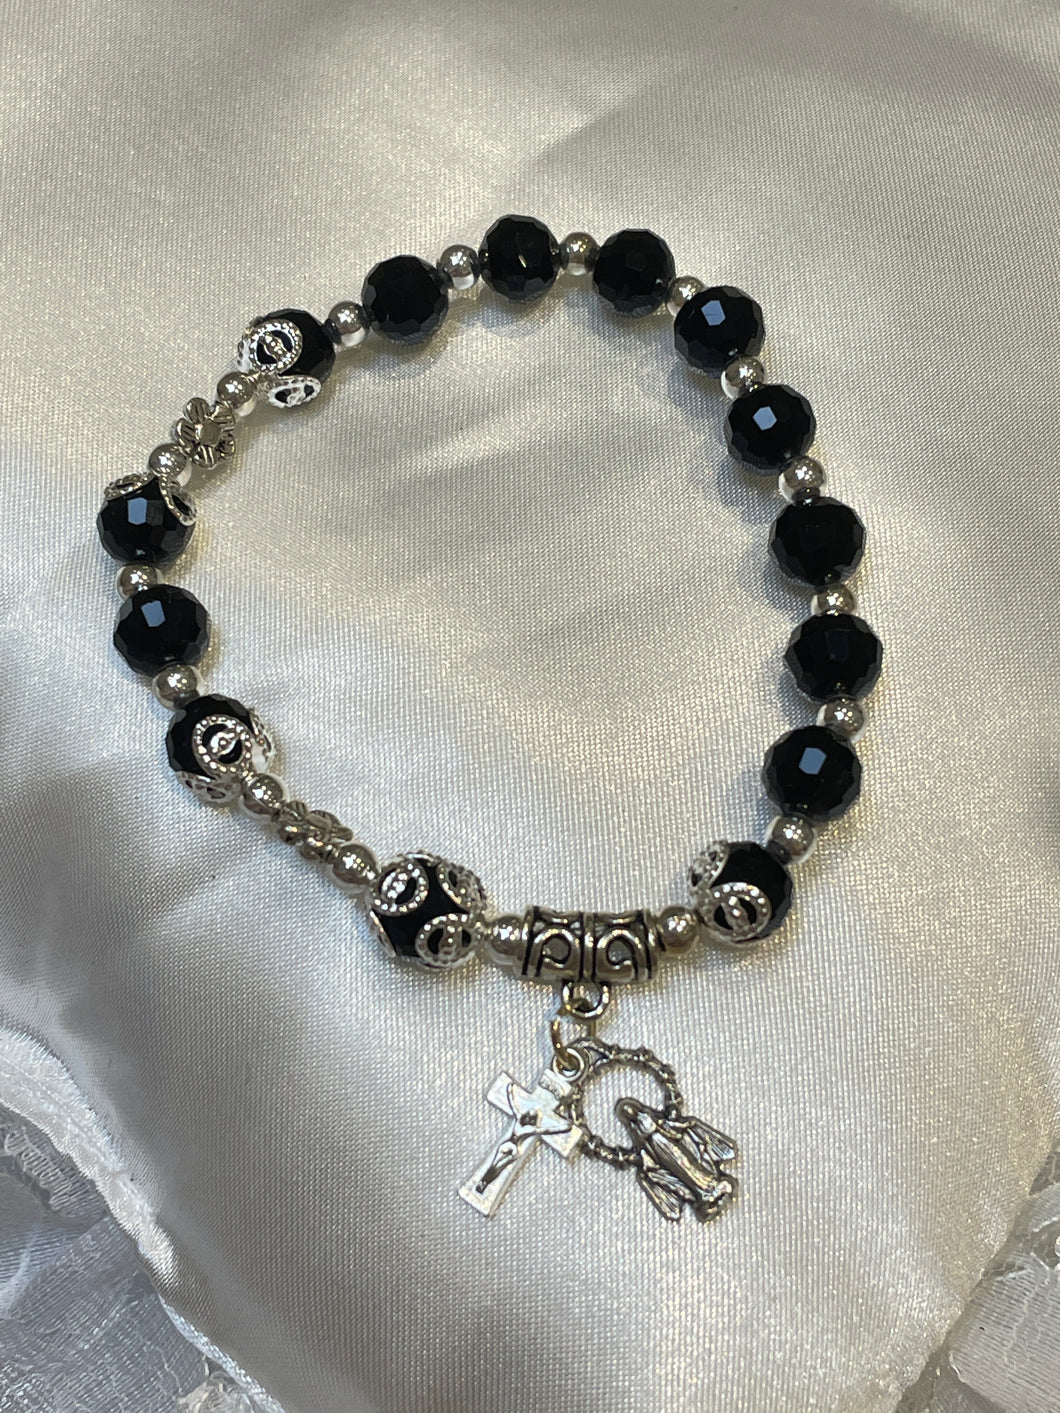 Black Crystal Rosary Bracelet with Our Lady of Grace and Crucifix Charms